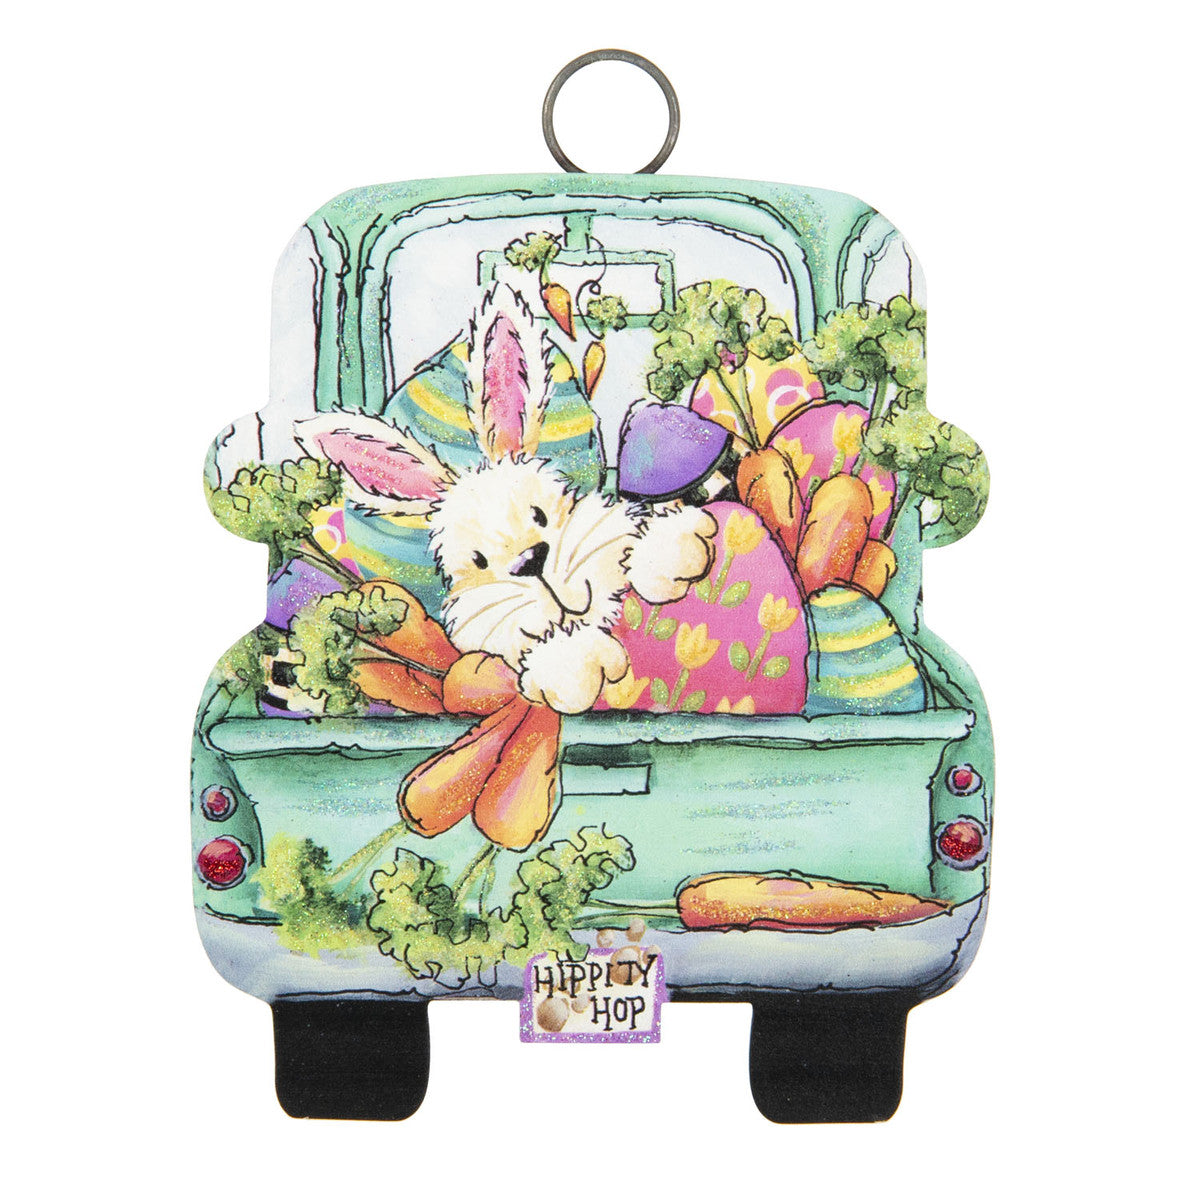 The Round Top Collection Mini Hippity Hop Truck Charm